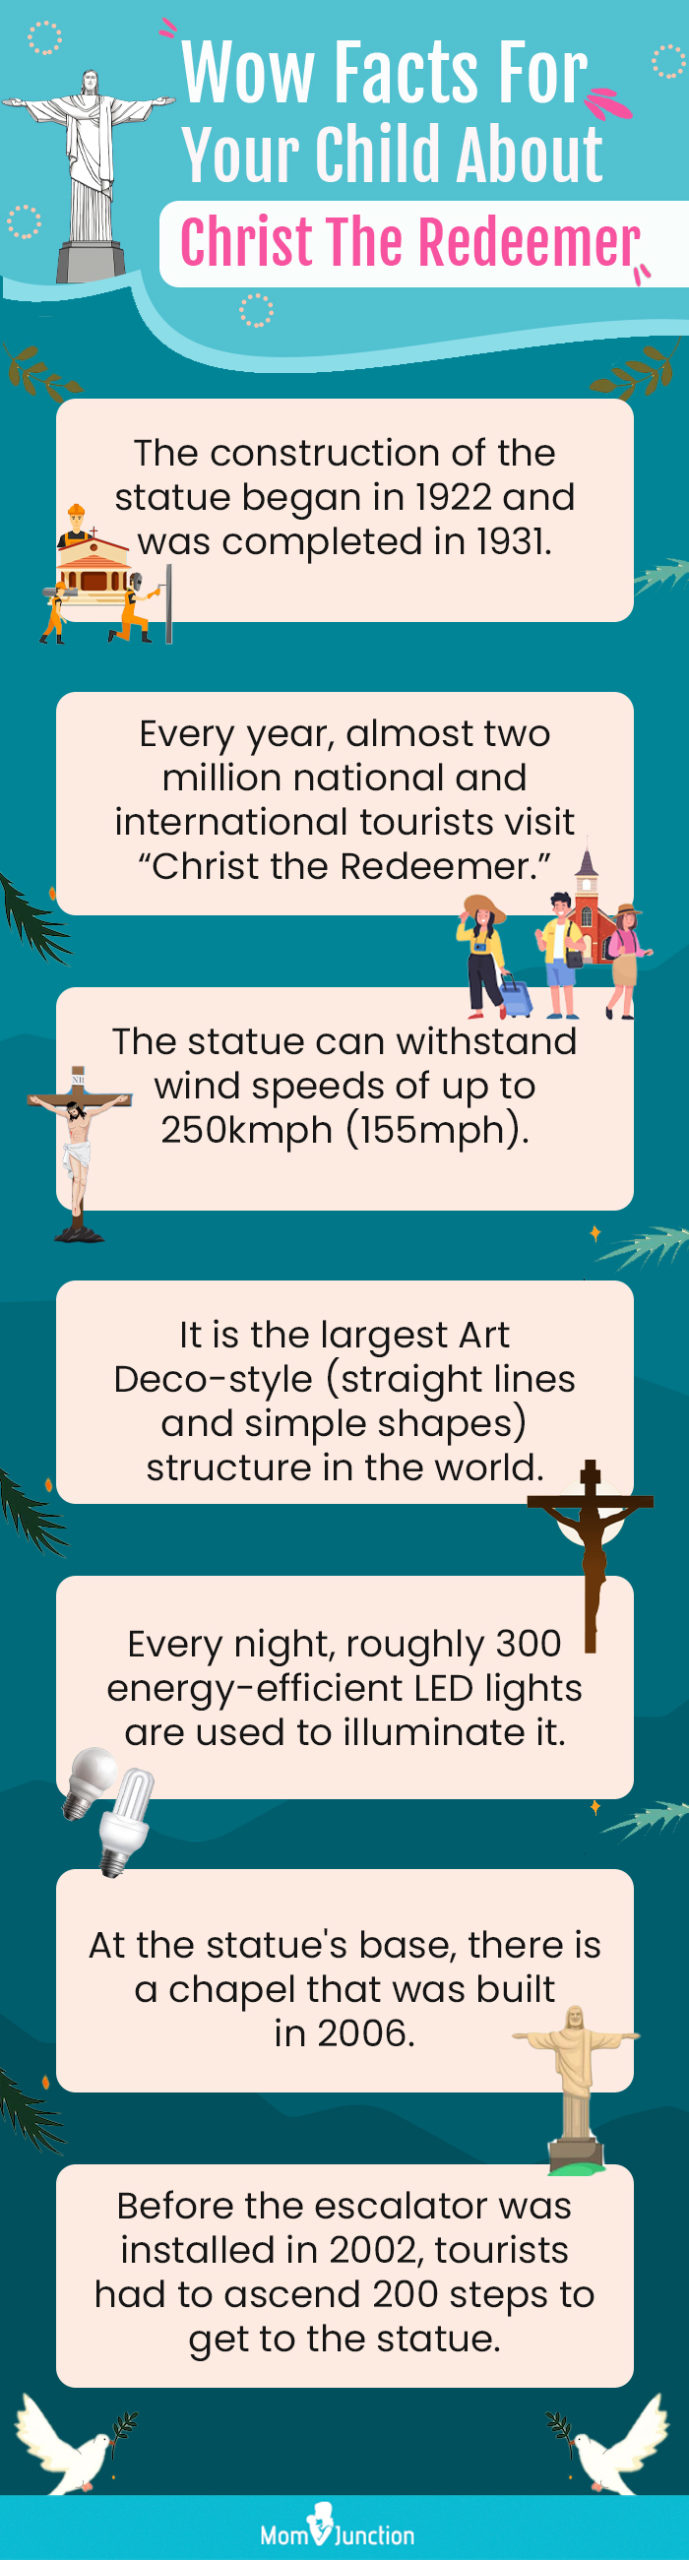 wow facts for your child about christ the redeemer (infographic)